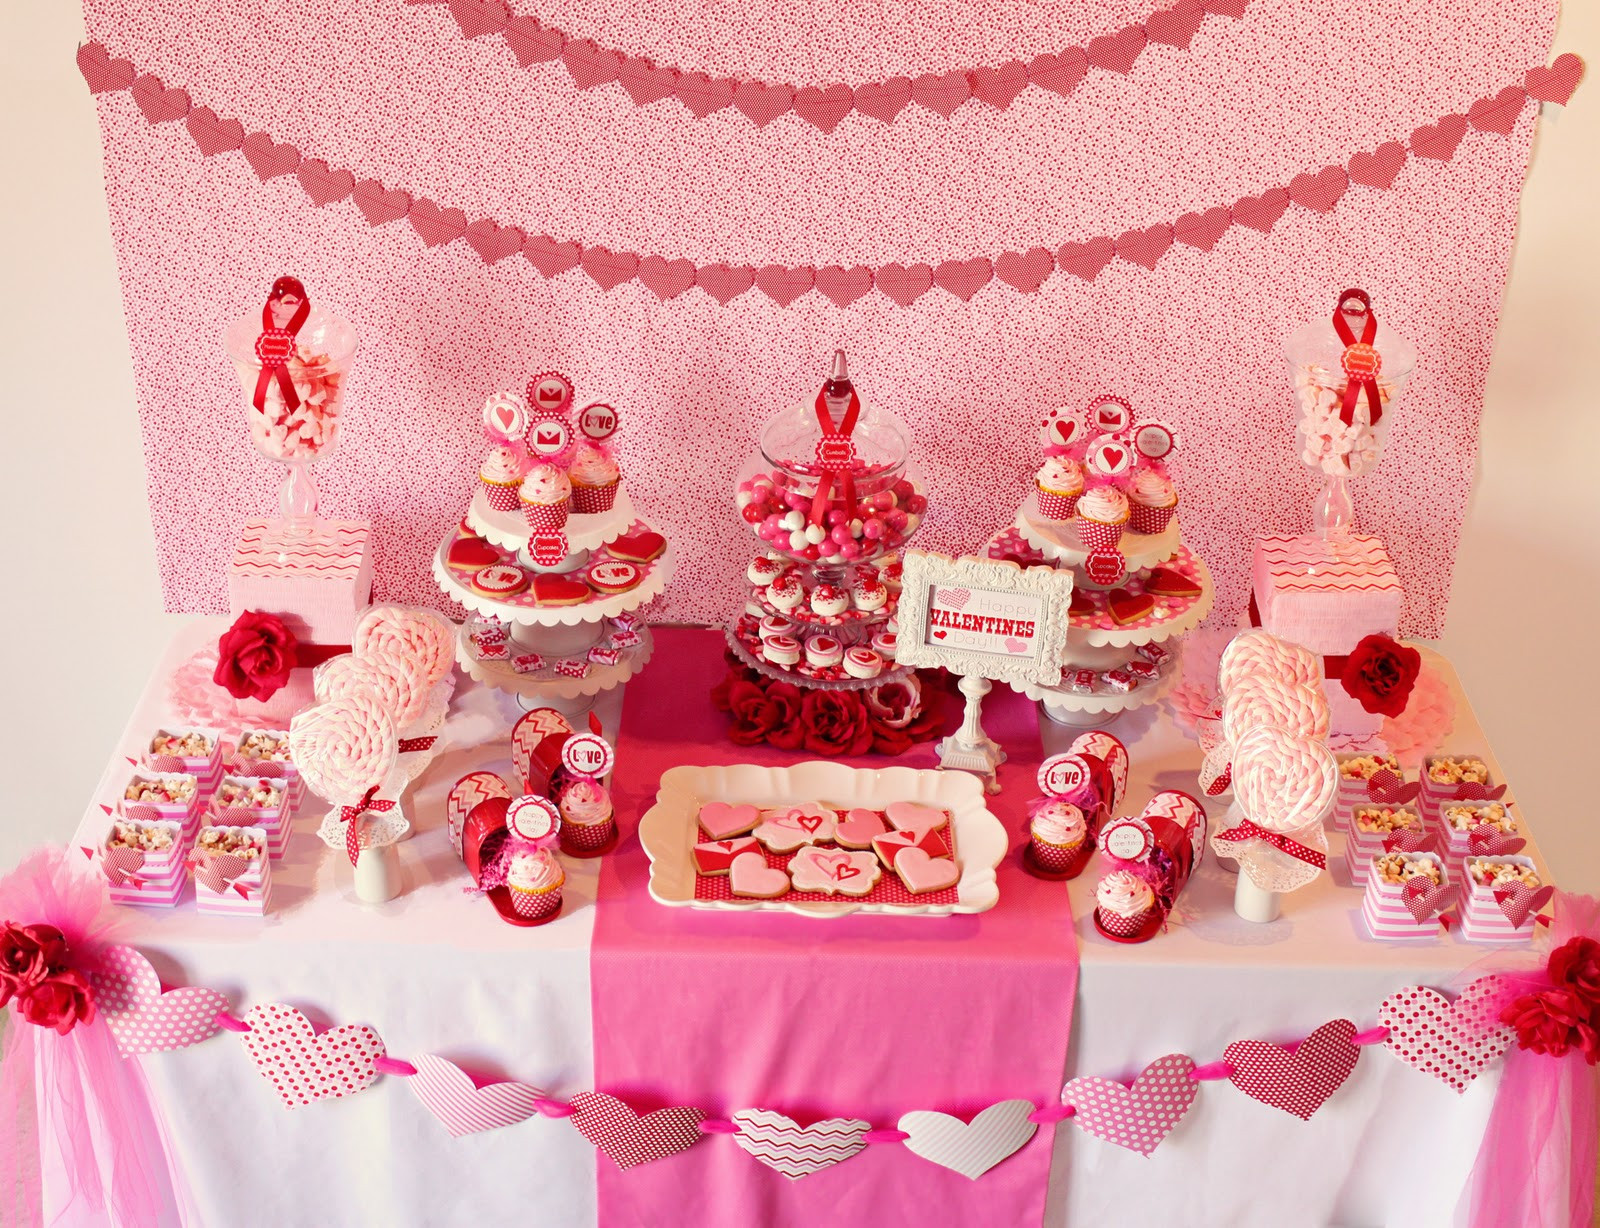 Valentines Day Party Decoration
 Amanda s Parties To Go Valentines Party Table Ideas